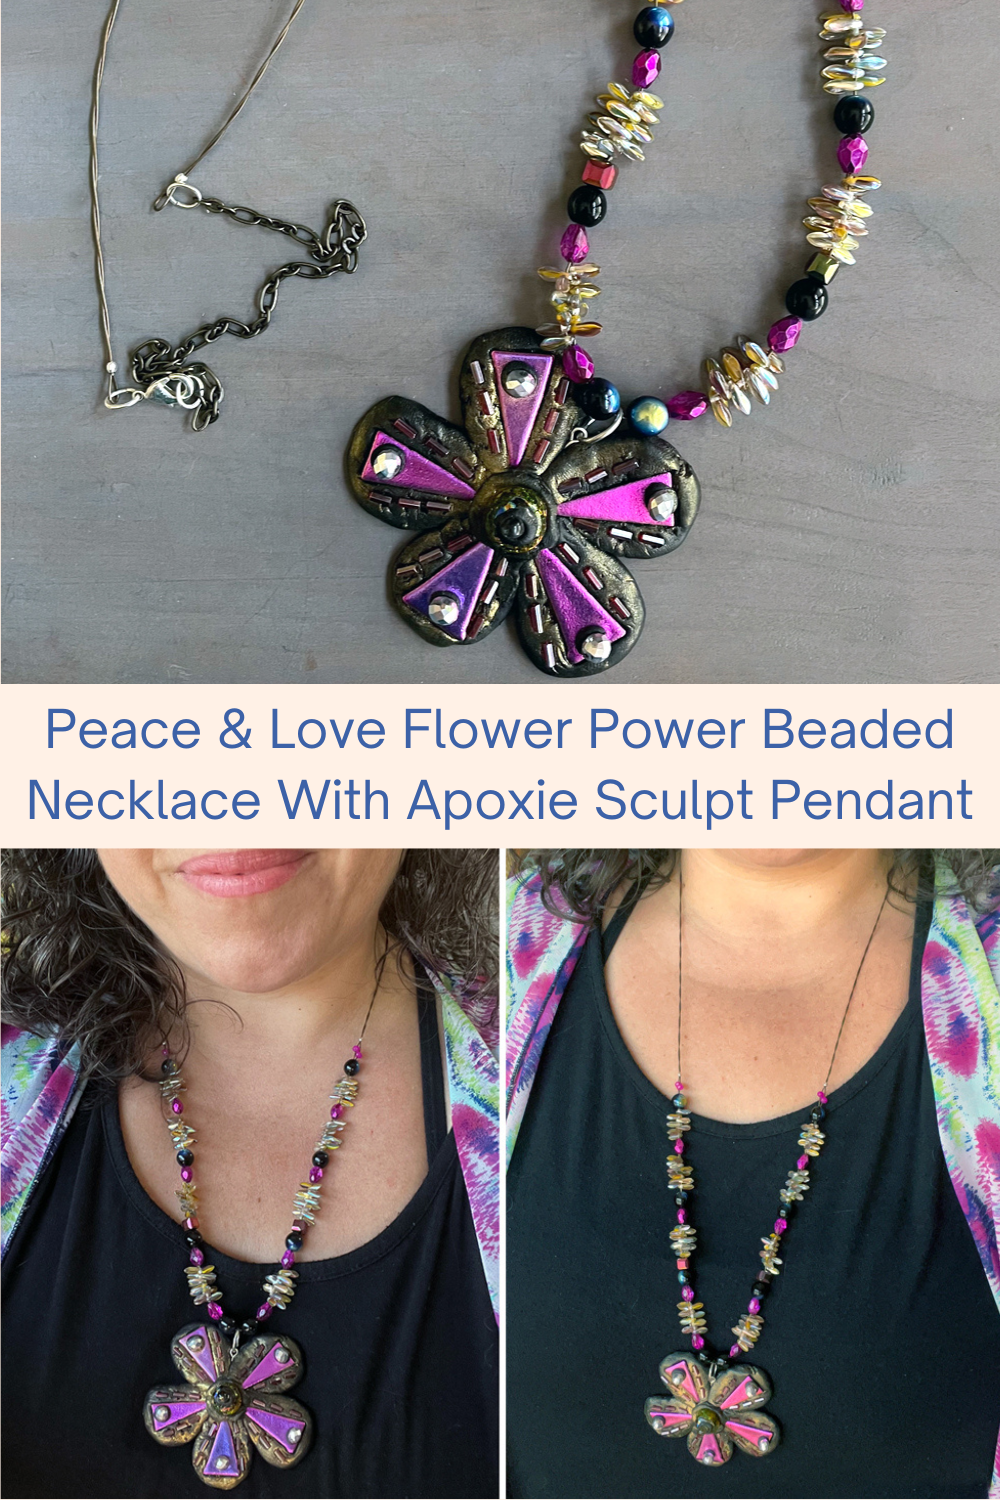 Peace & Love Flower Power Beaded Necklace With Apoxie Sculpt Pendant Collage